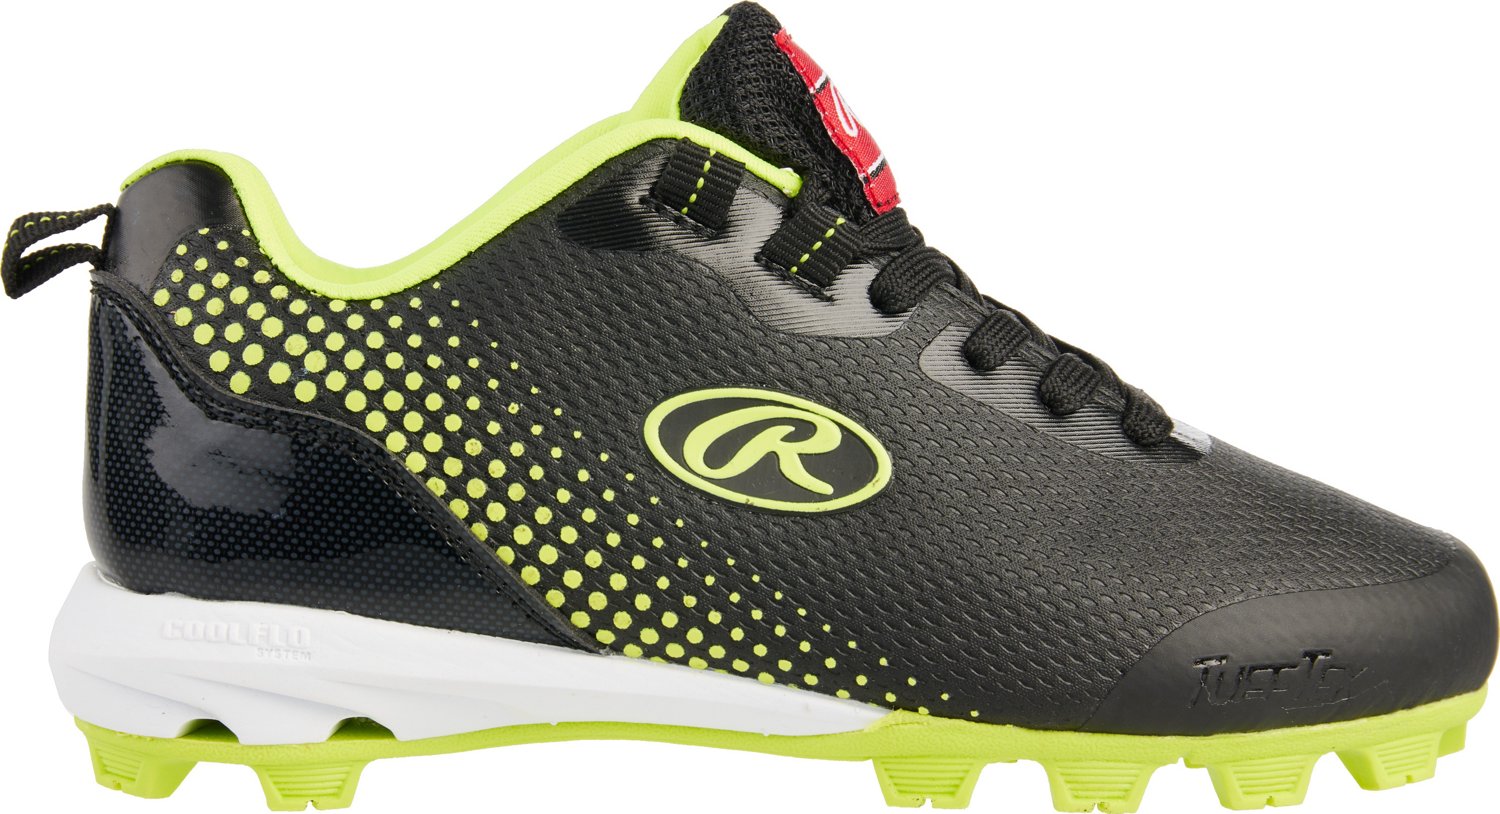 Rawlings Boys’ Division Low Baseball Cleats                                                                                    - view number 1 selected